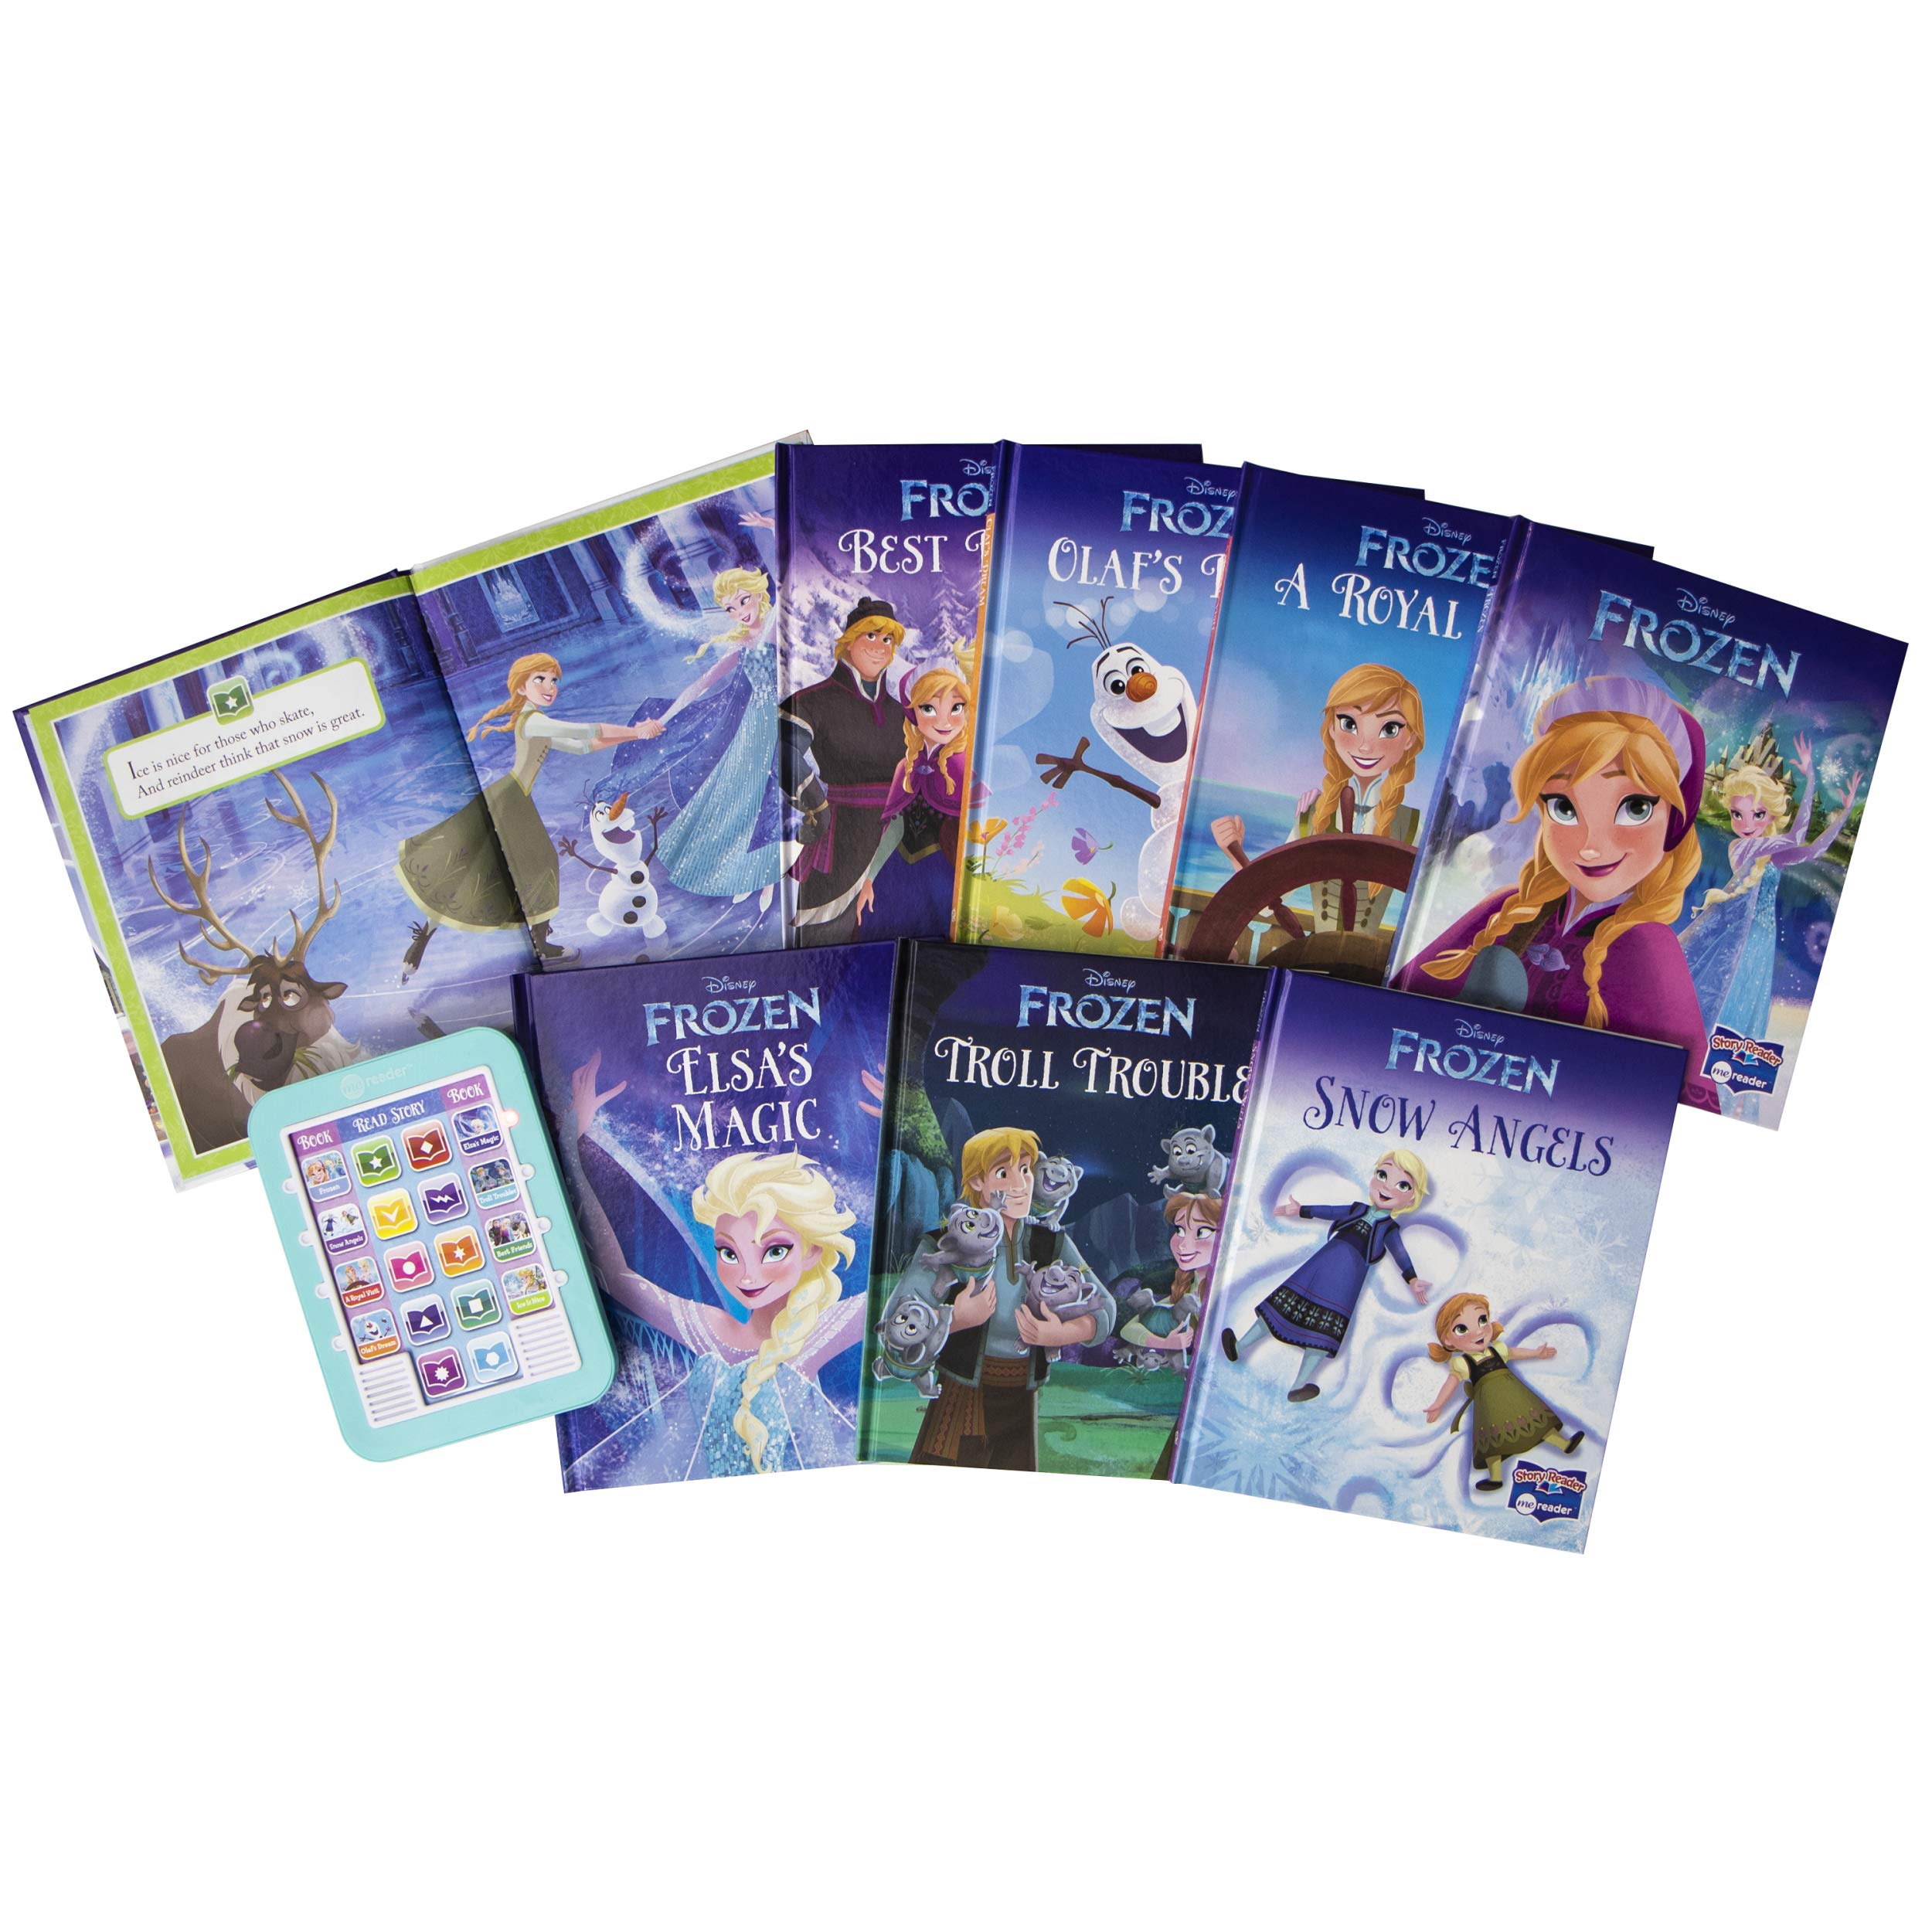 Disney Frozen Elsa, Anna, Olaf, and More! - Me Reader Electronic Reader and 8-Sound Book Library - PI Kids